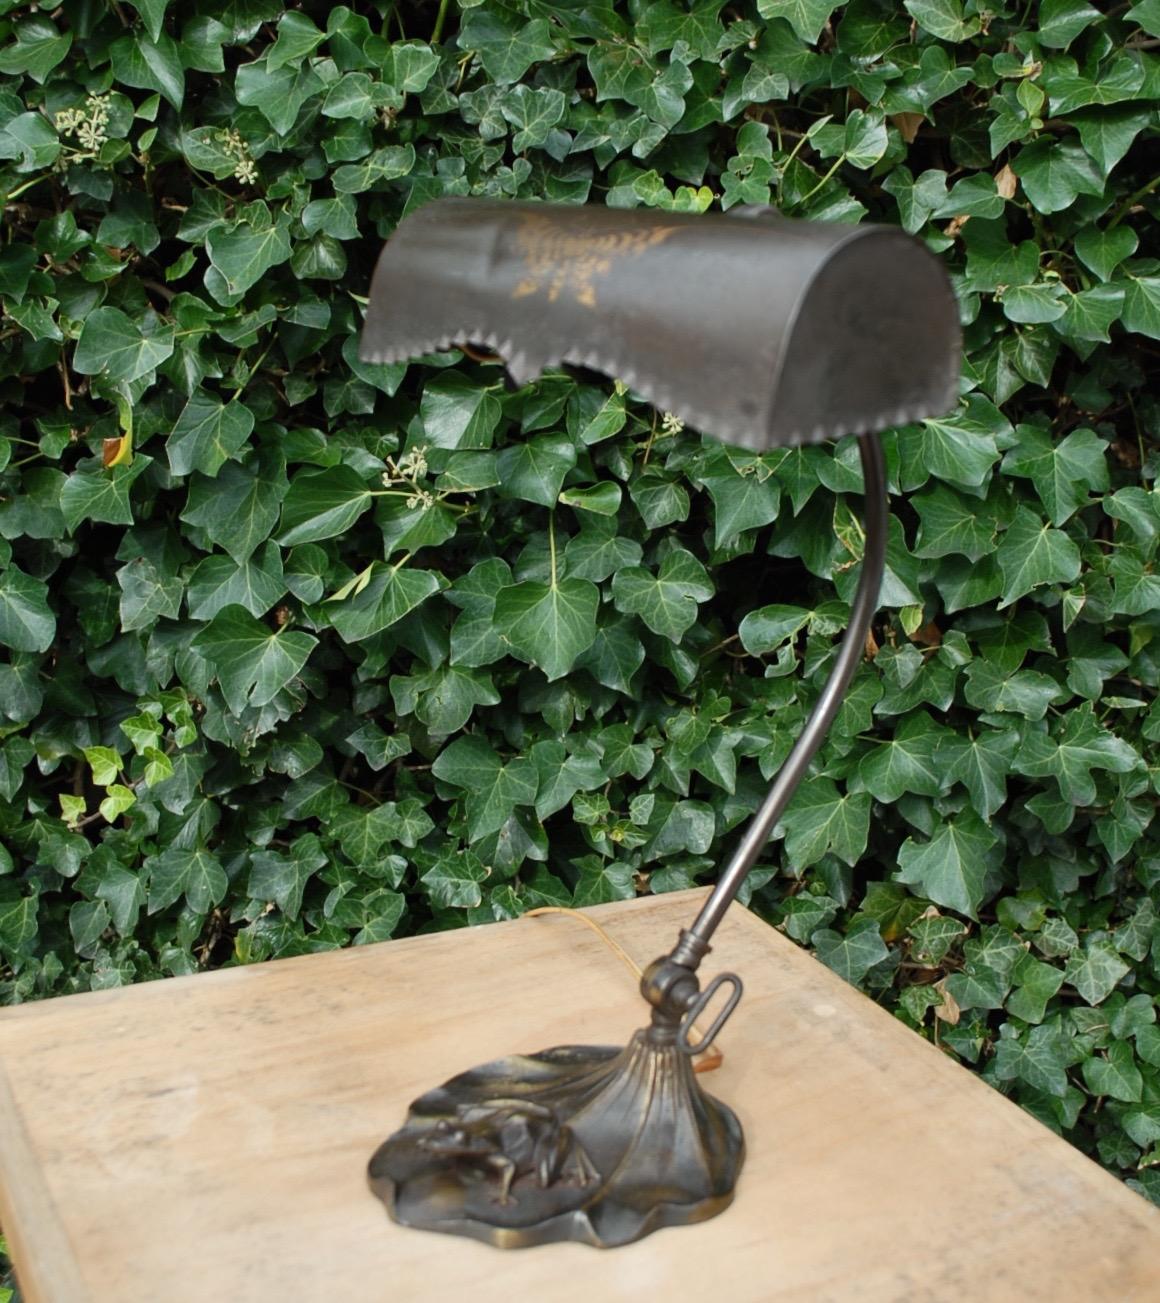 Elegant Austria Jugendstil Bronze and Metal Piano, Table or Desk Lamp with Frog.

Here is another one of our recent great finds. This truly wonderful lamp from the Austrian Arts & Crafts era comes with a gorgeous frog sculpture sitting on an evenly